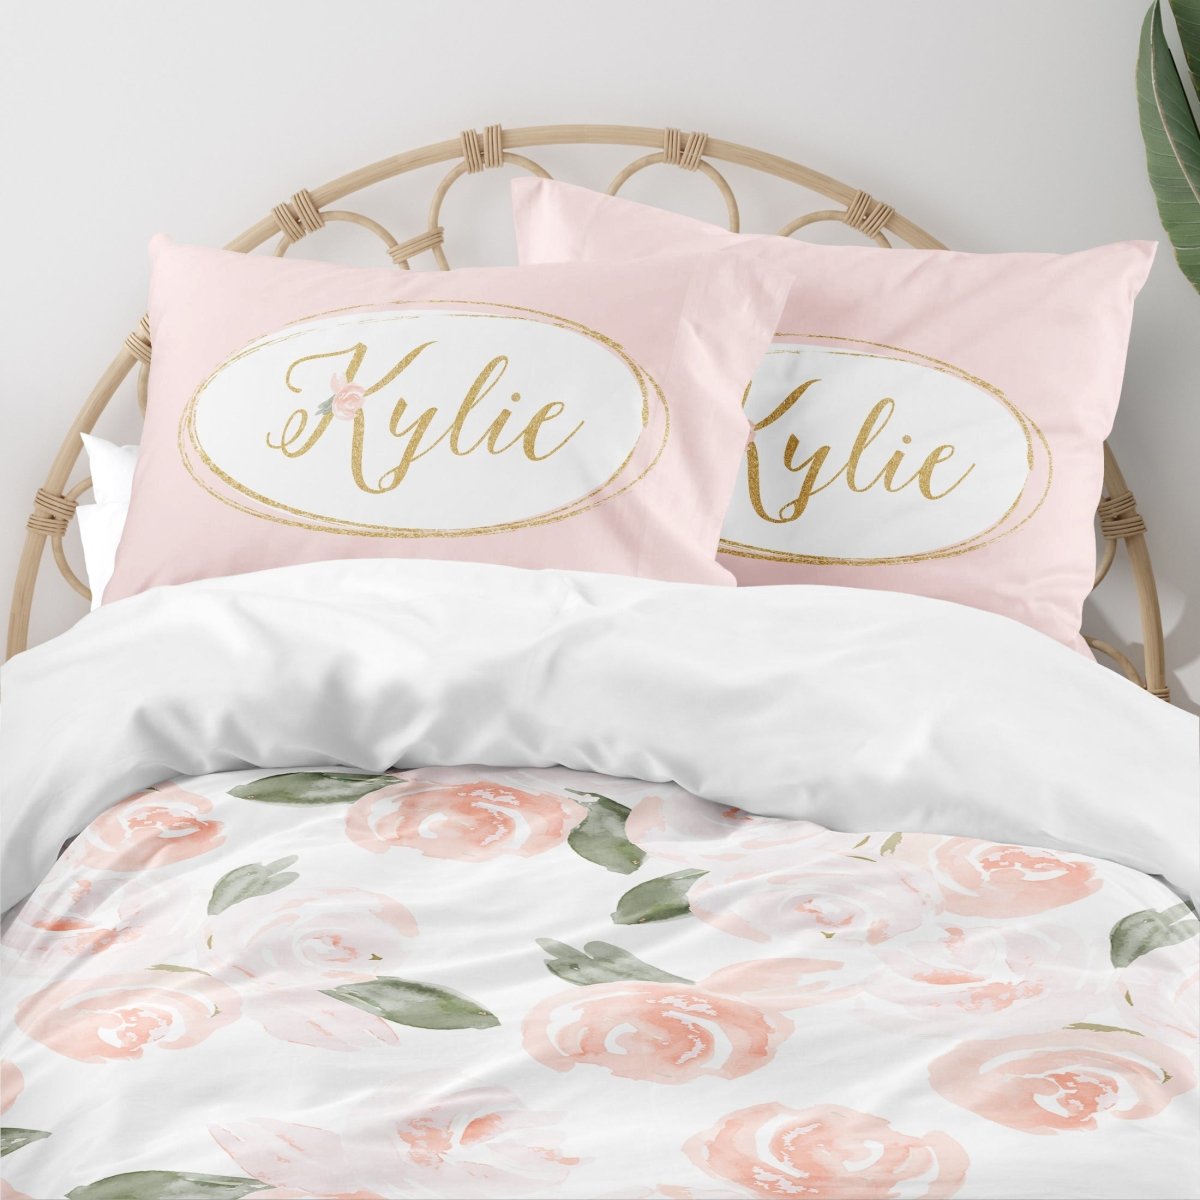 Watercolor Floral Personalized Kids Bedding Set (Comforter or Duvet Cover) - gender_girl, text, Theme_Floral